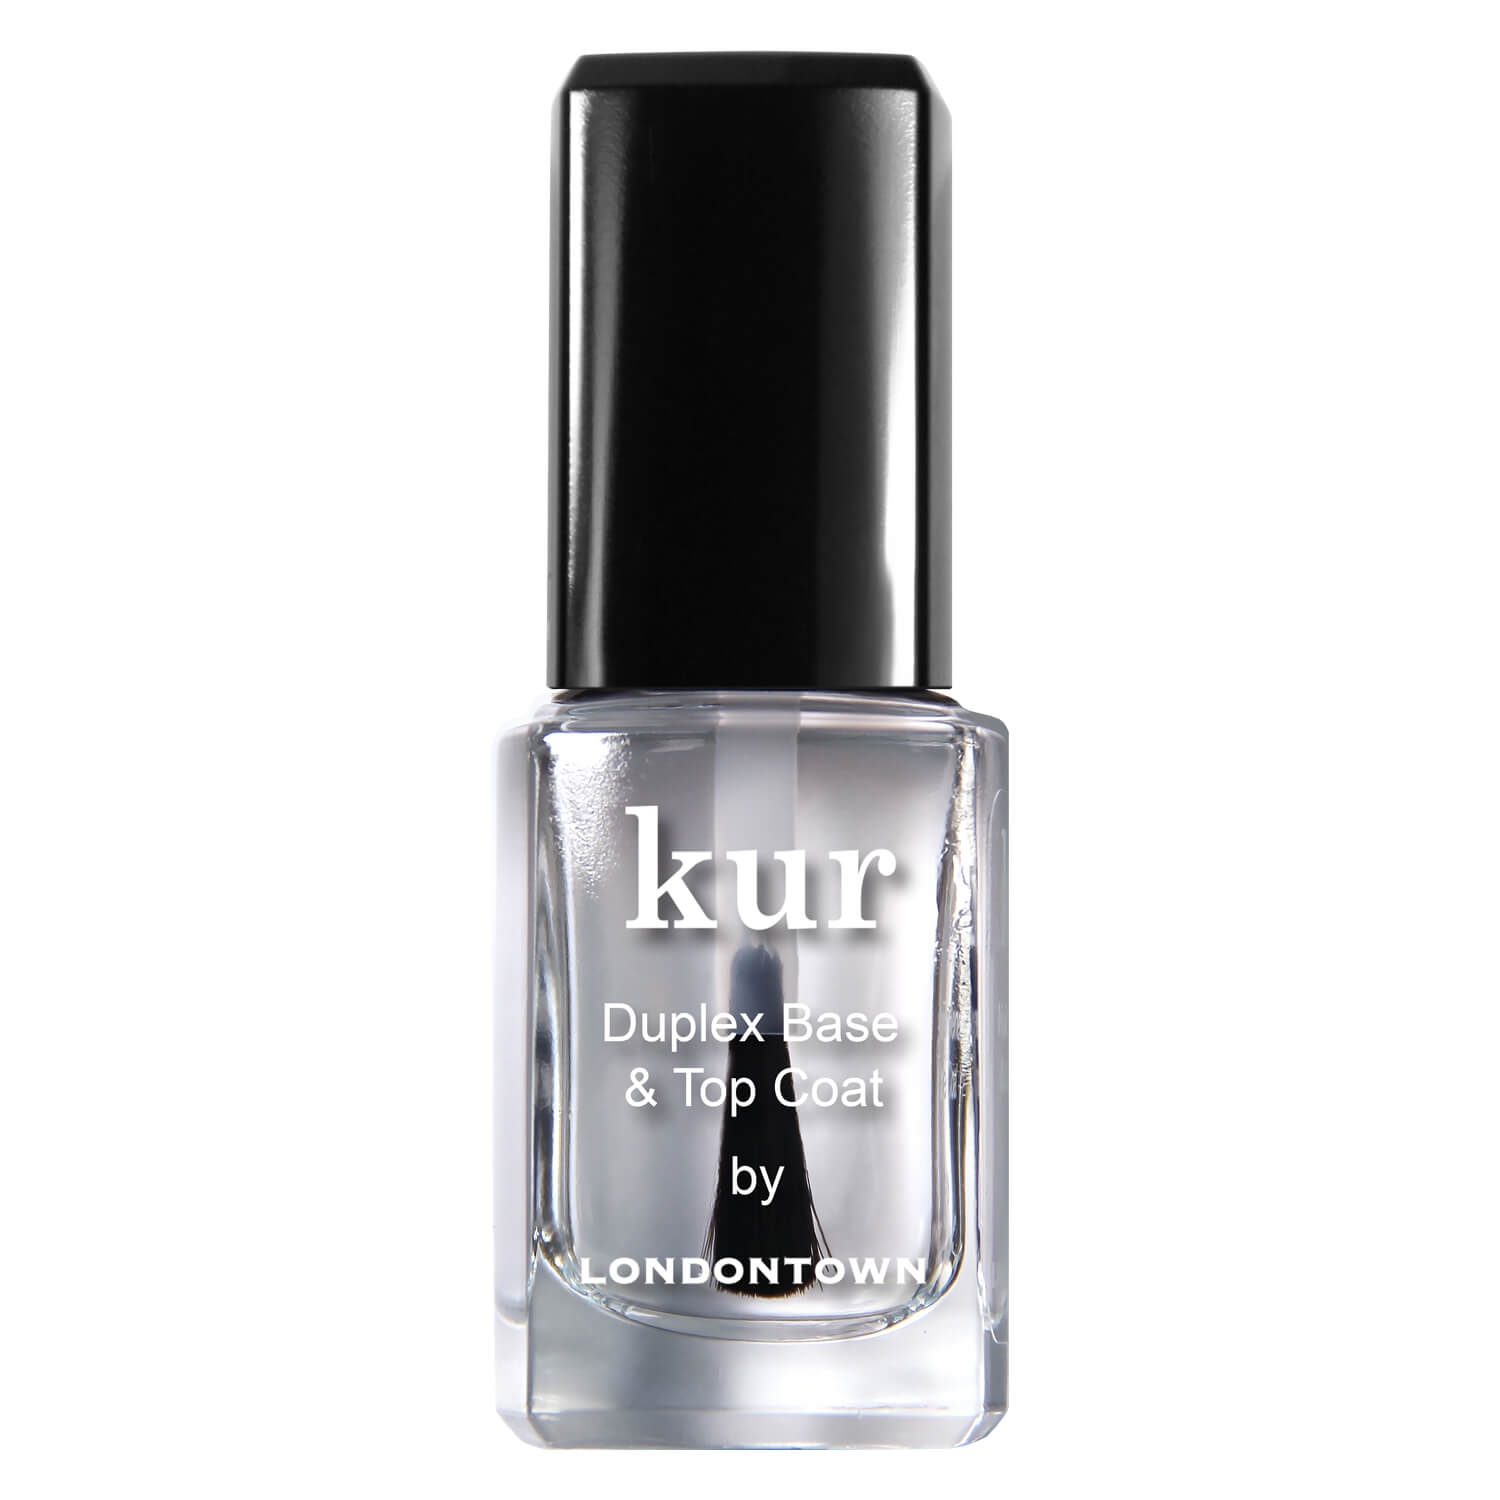 Product image from kur - Duplex Base & Top Coat